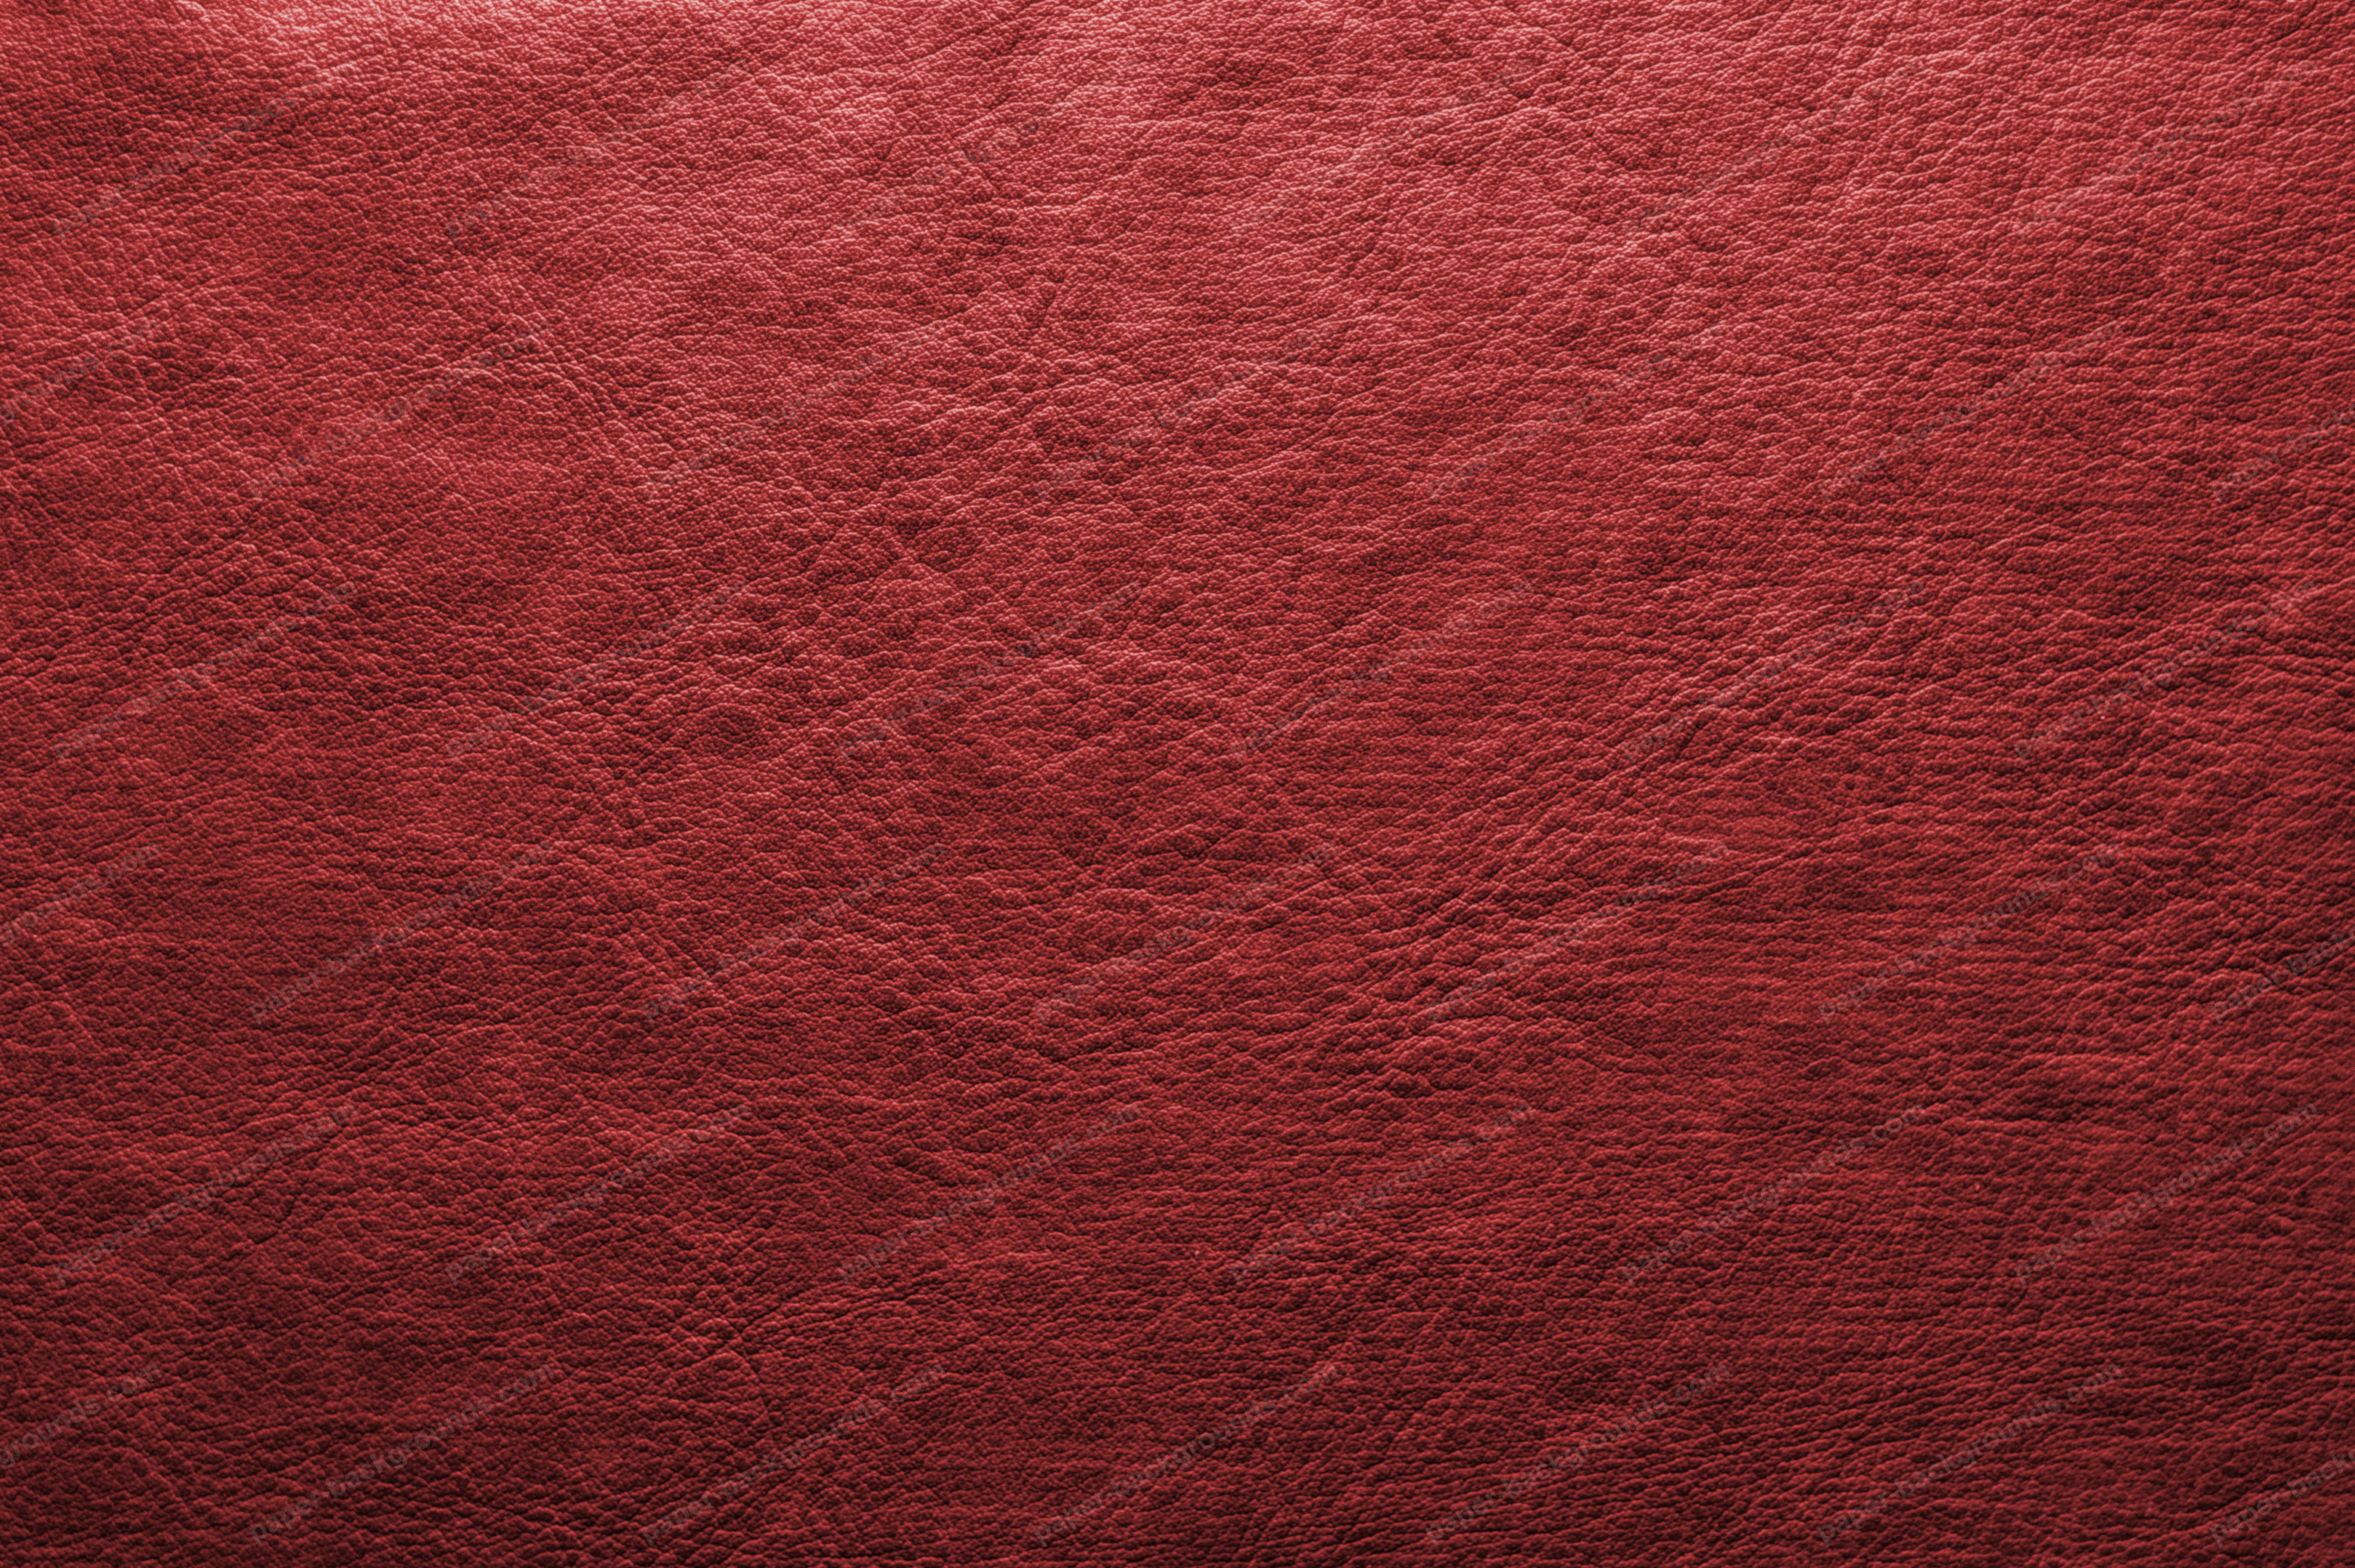 Abstract Red Leather Background Paper Backgrounds